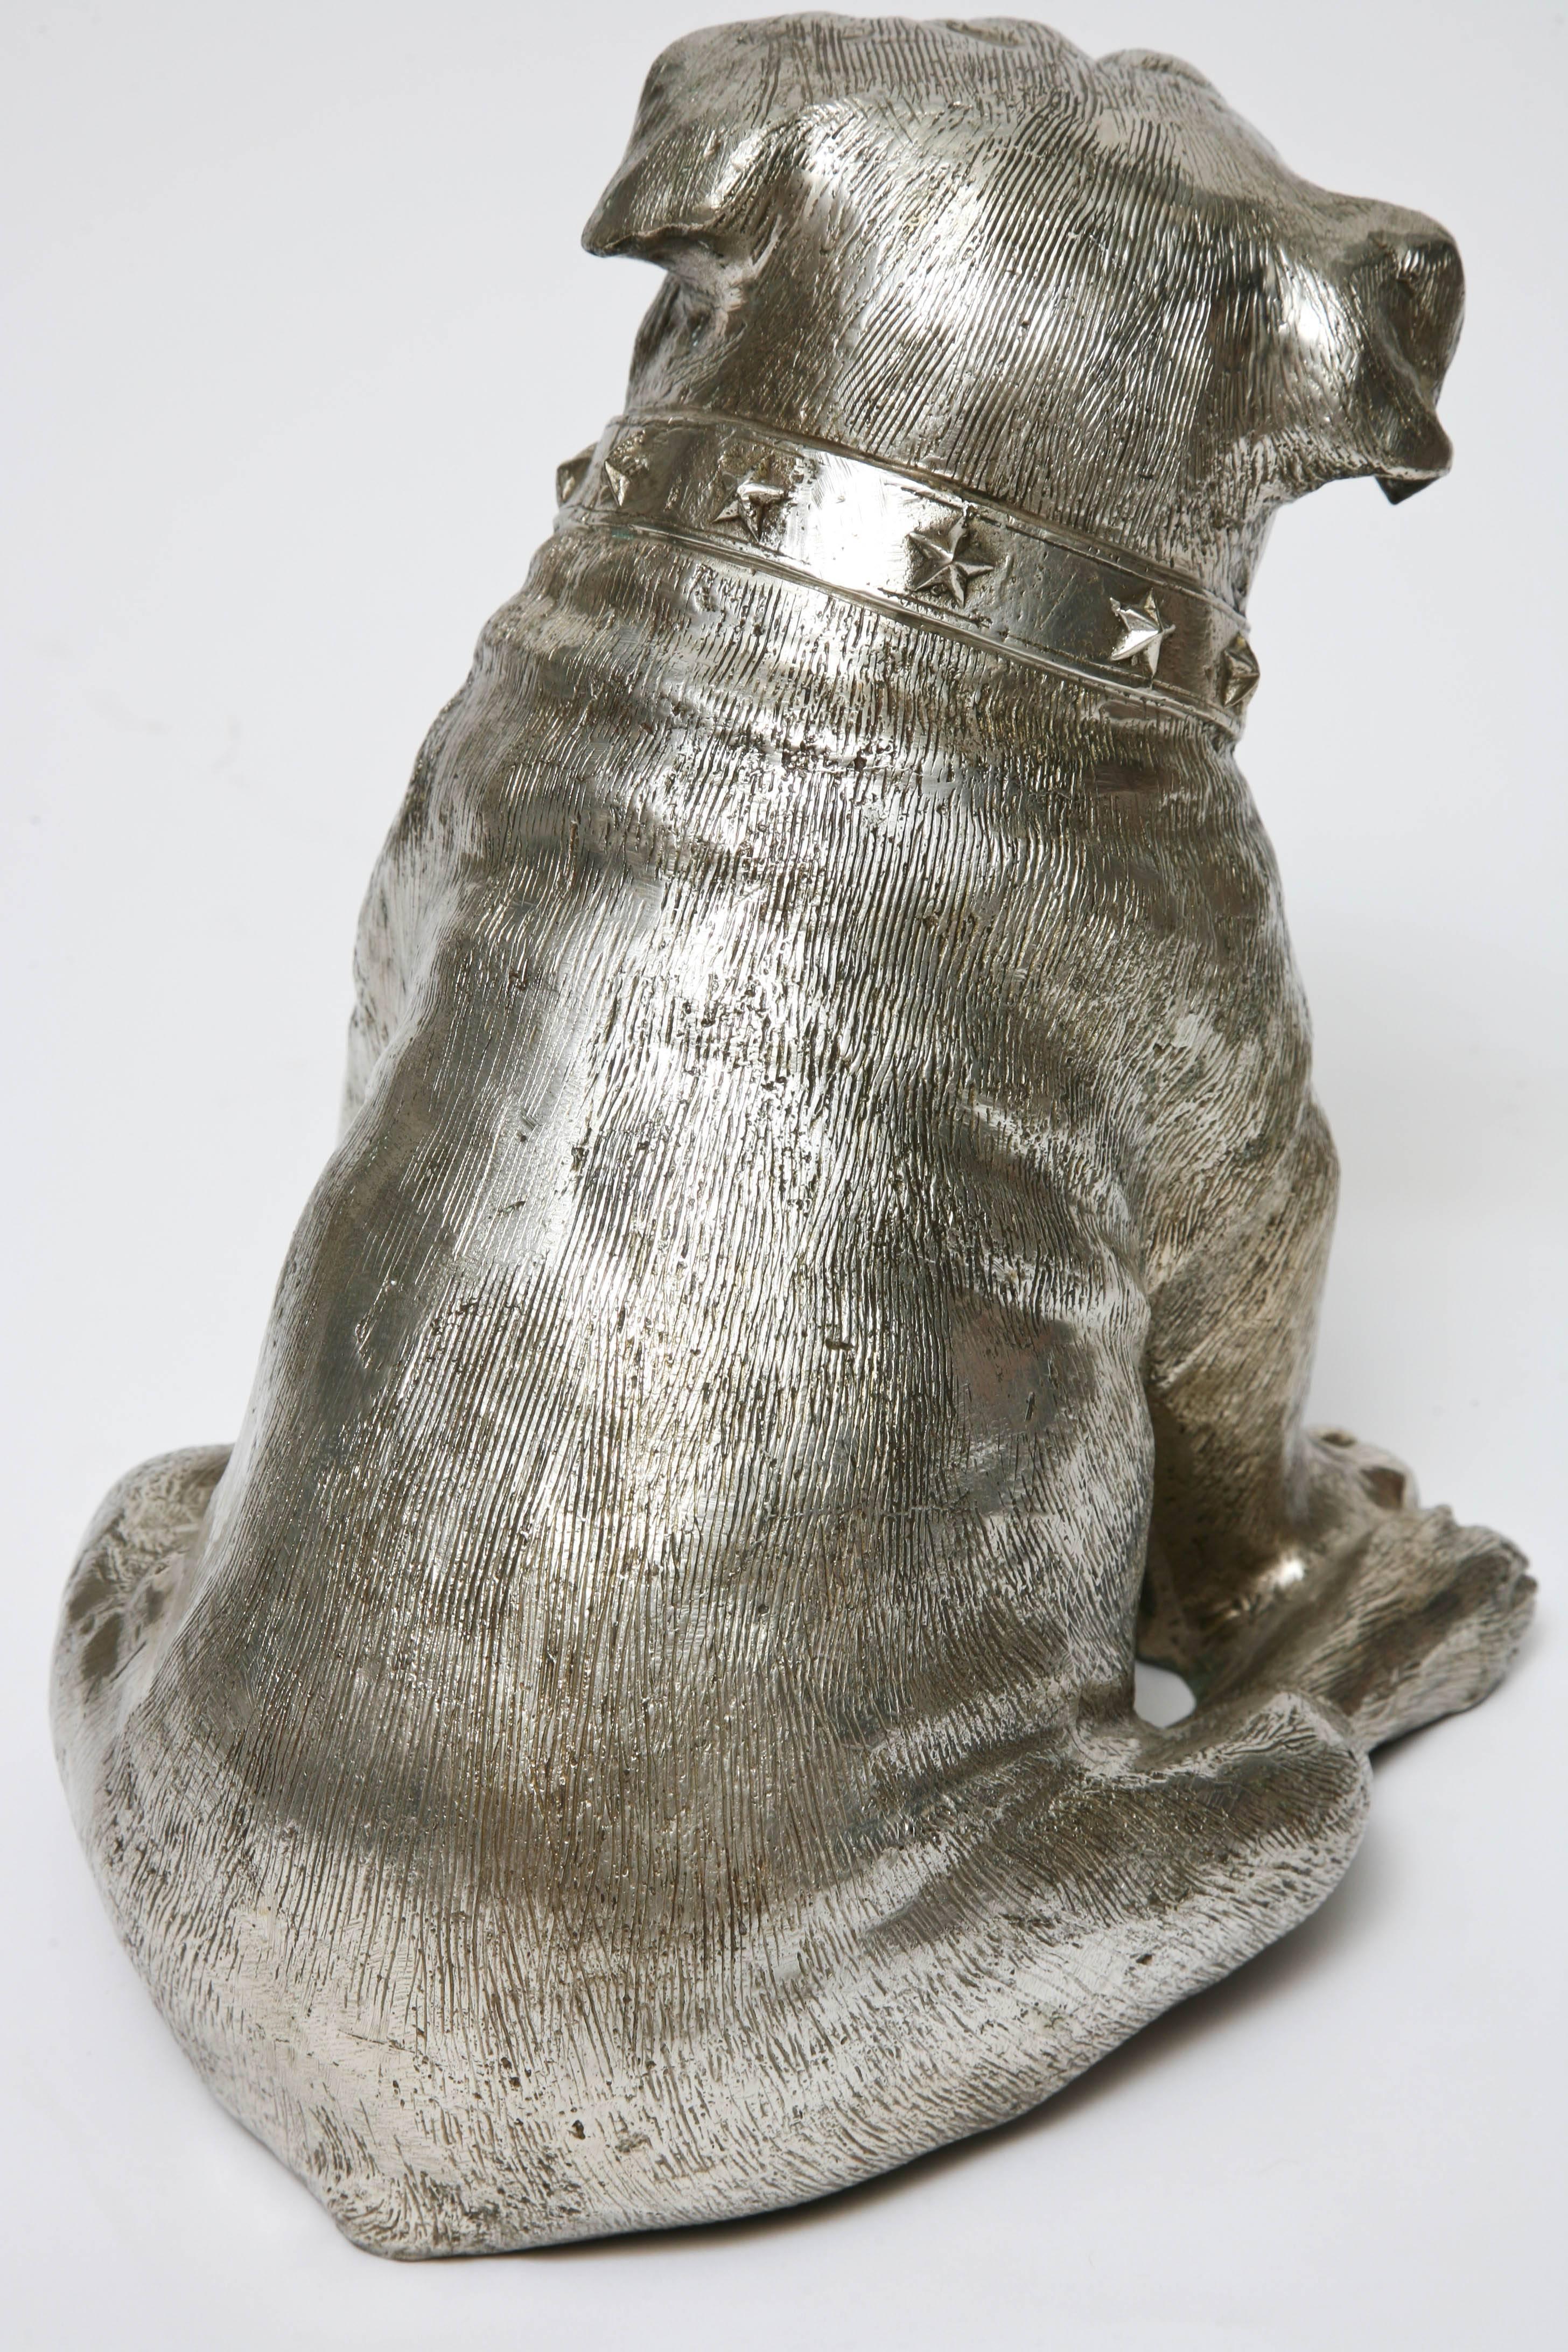 Silver Plated Bronze Seated Bull Dog by C H Valton 1